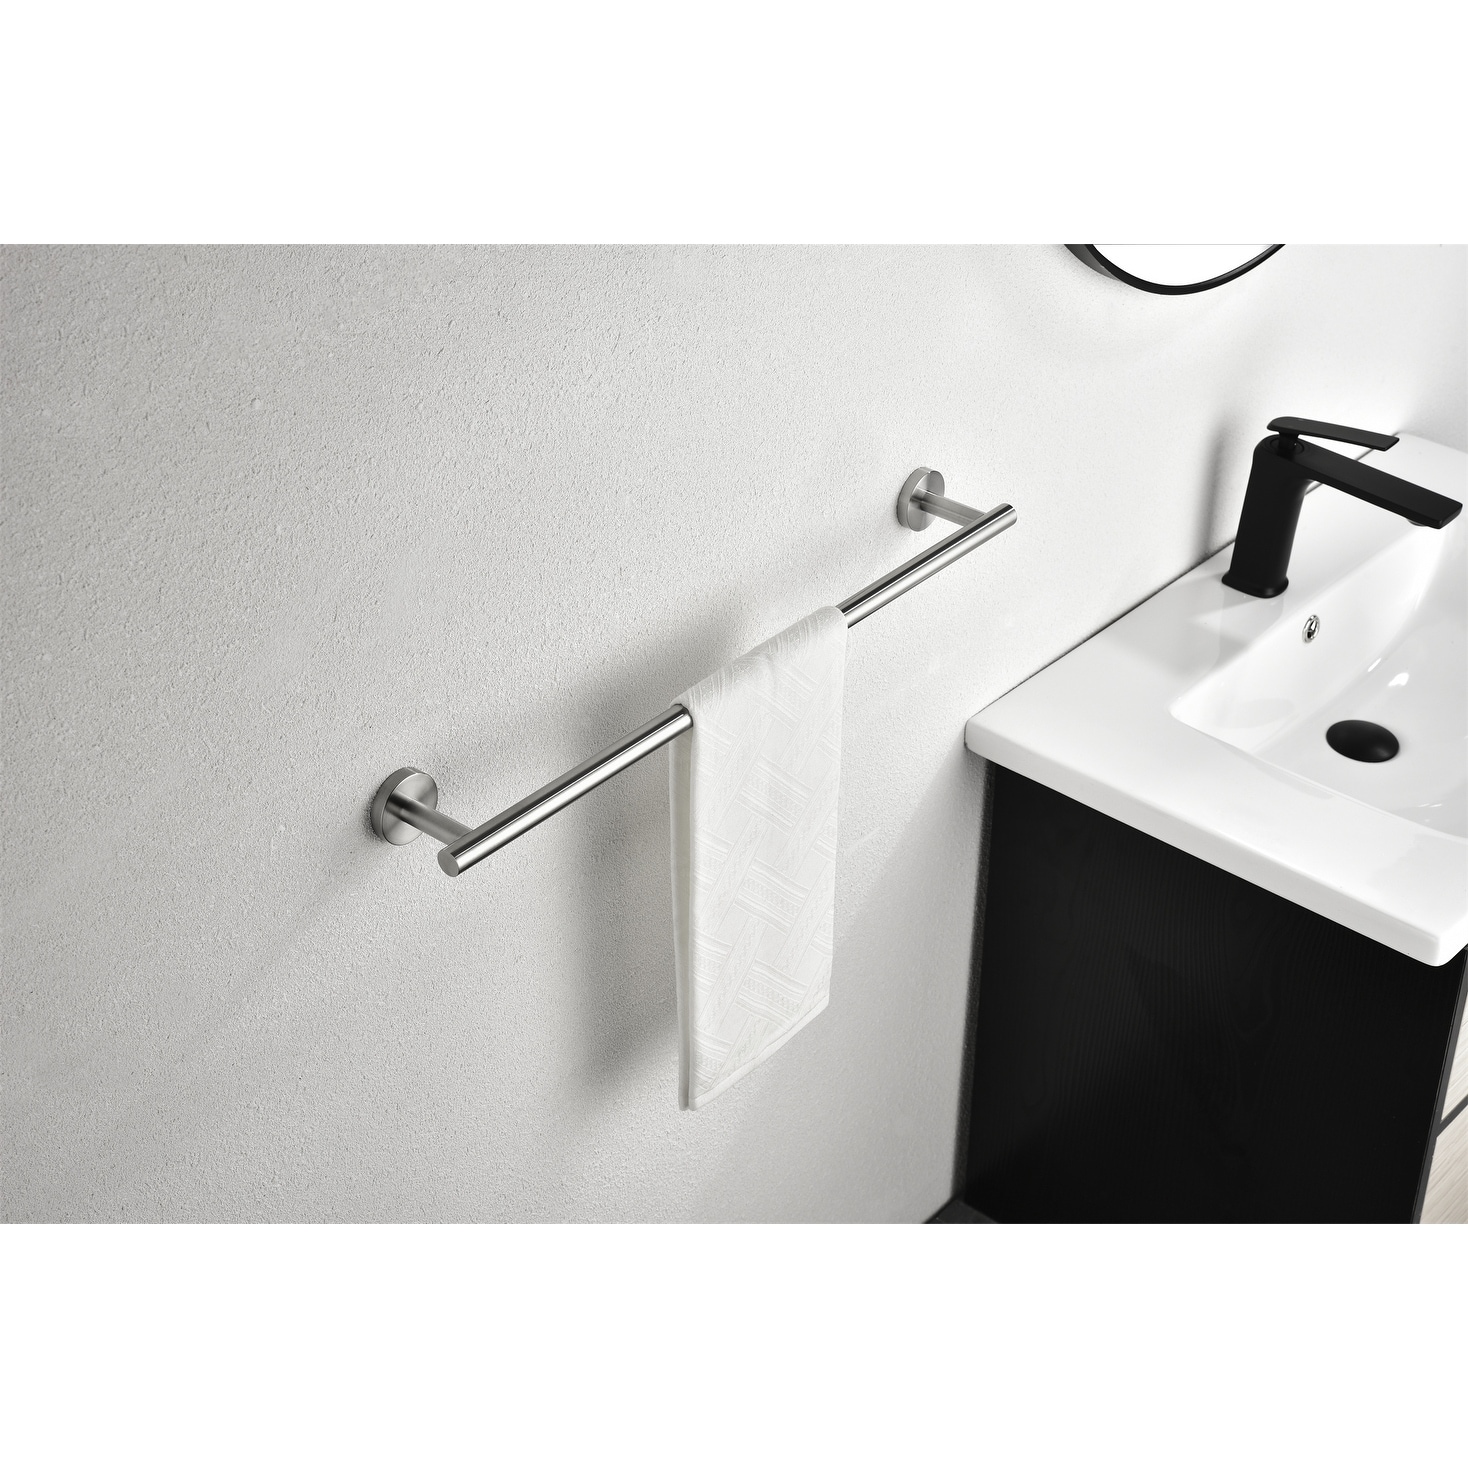 https://ak1.ostkcdn.com/images/products/is/images/direct/f66d278aefbefcc13b58551abf39b2337fcaecae/6-Piece-Wall-Mount-Stainless-Steel-Bathroom-Towel-Rack-Set.jpg